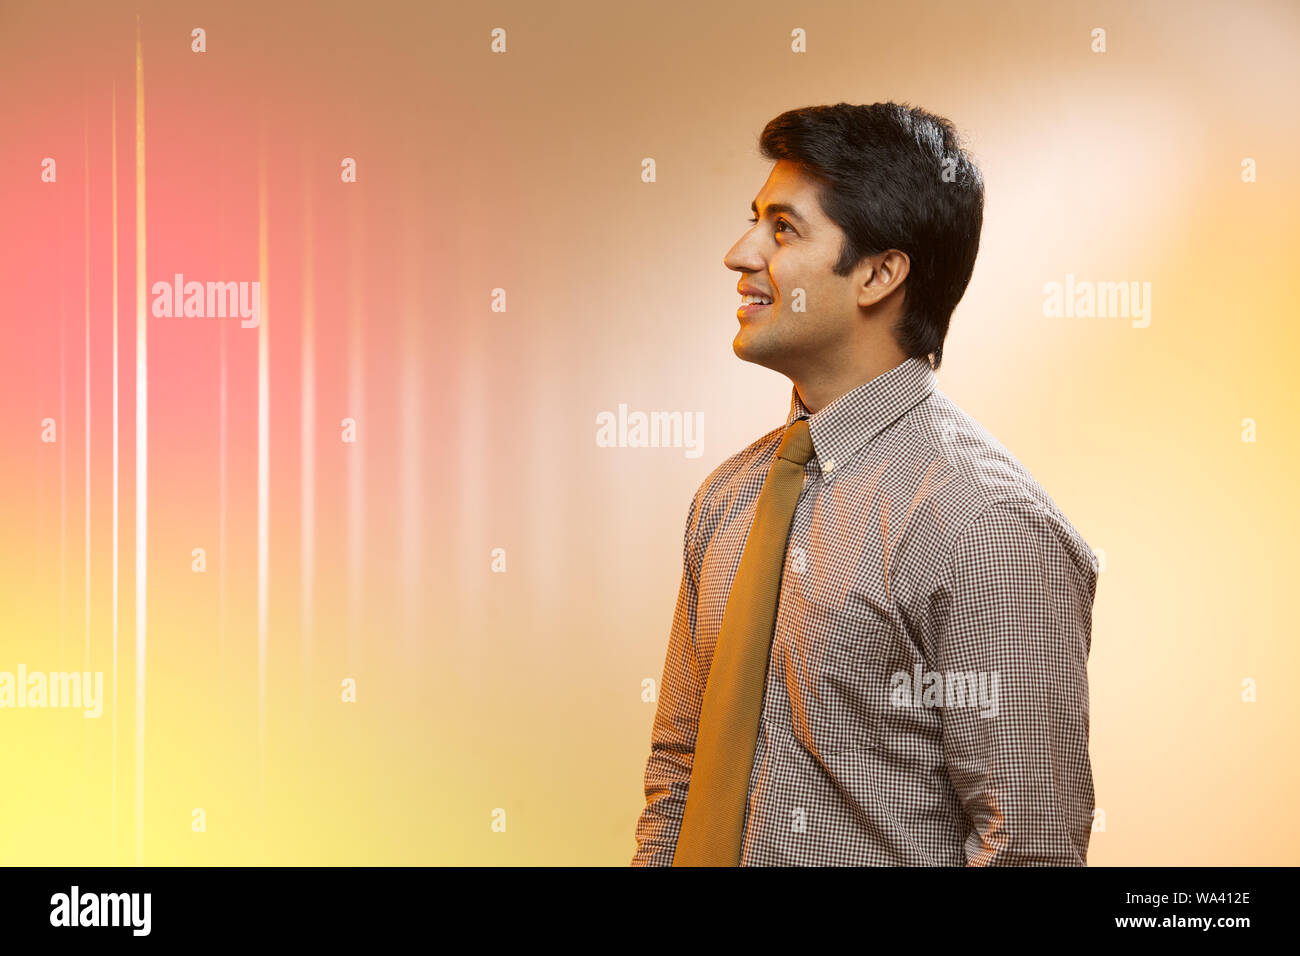 Businessman looking at light streams and smiling Stock Photo